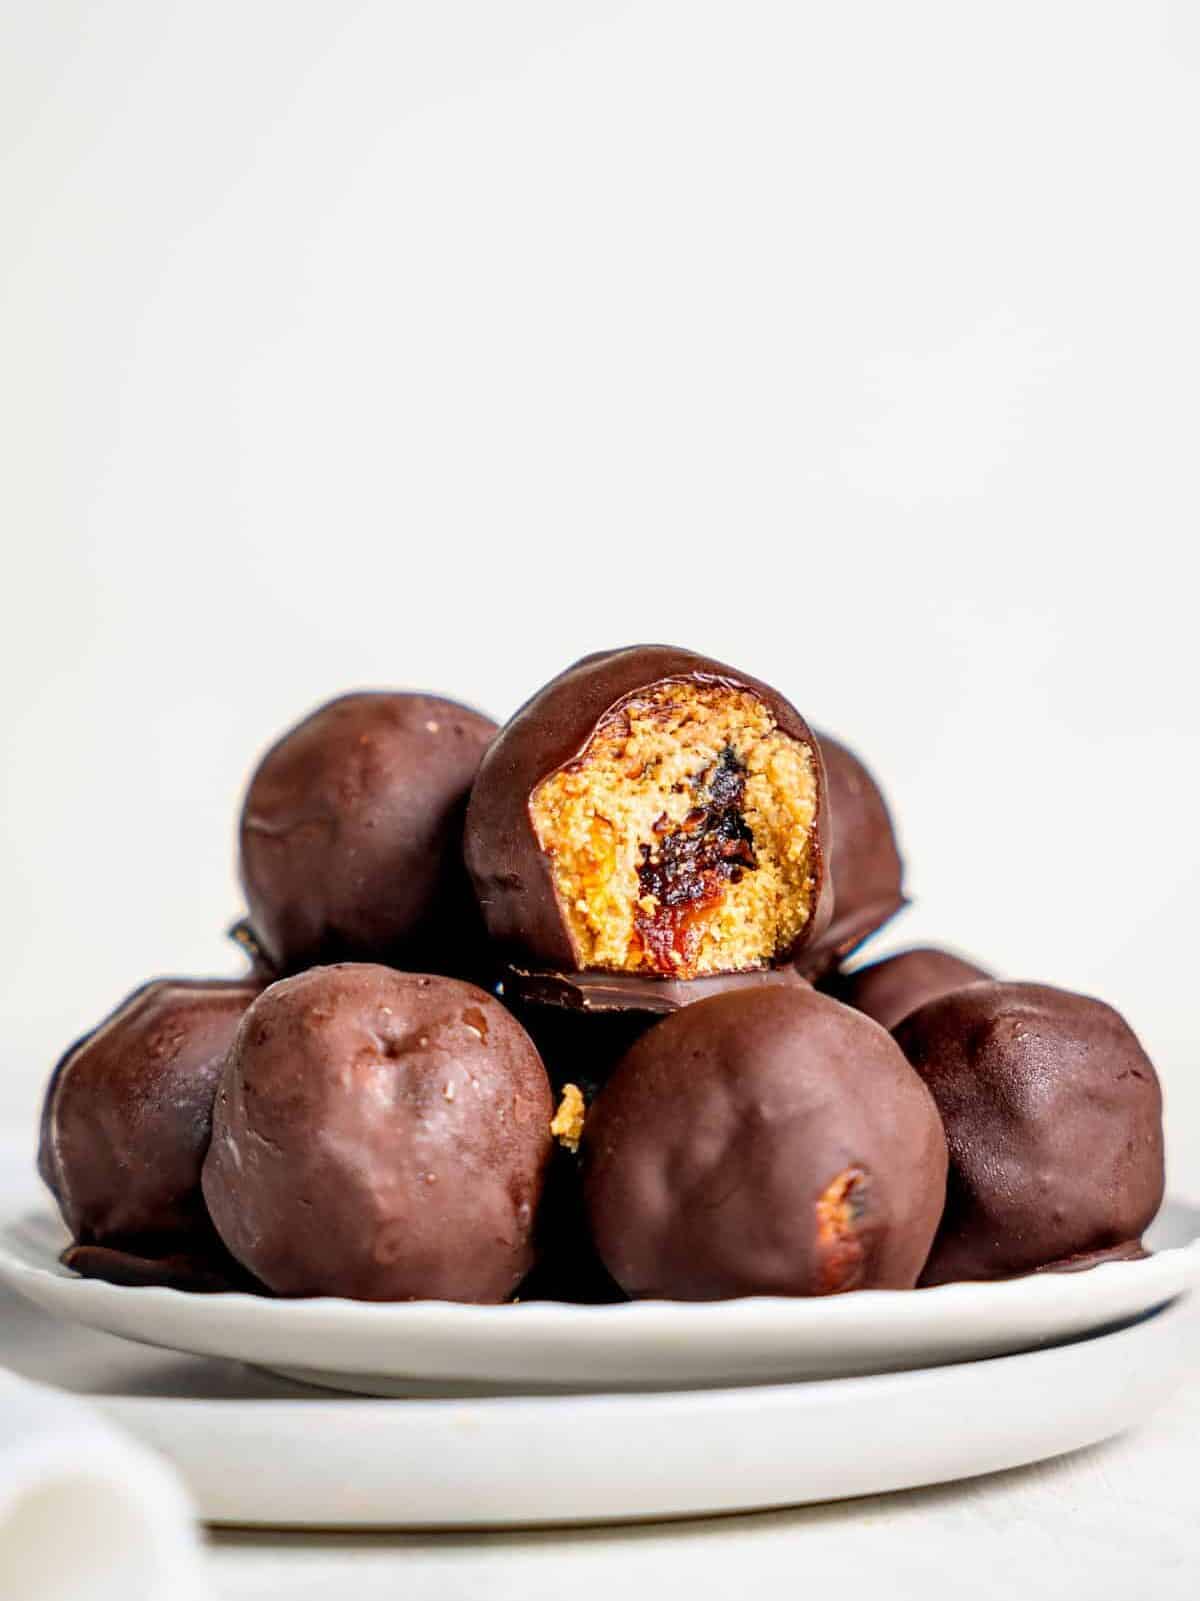 Snickers Energy Balls on a plate, one has a bite missing, revealing the inside.